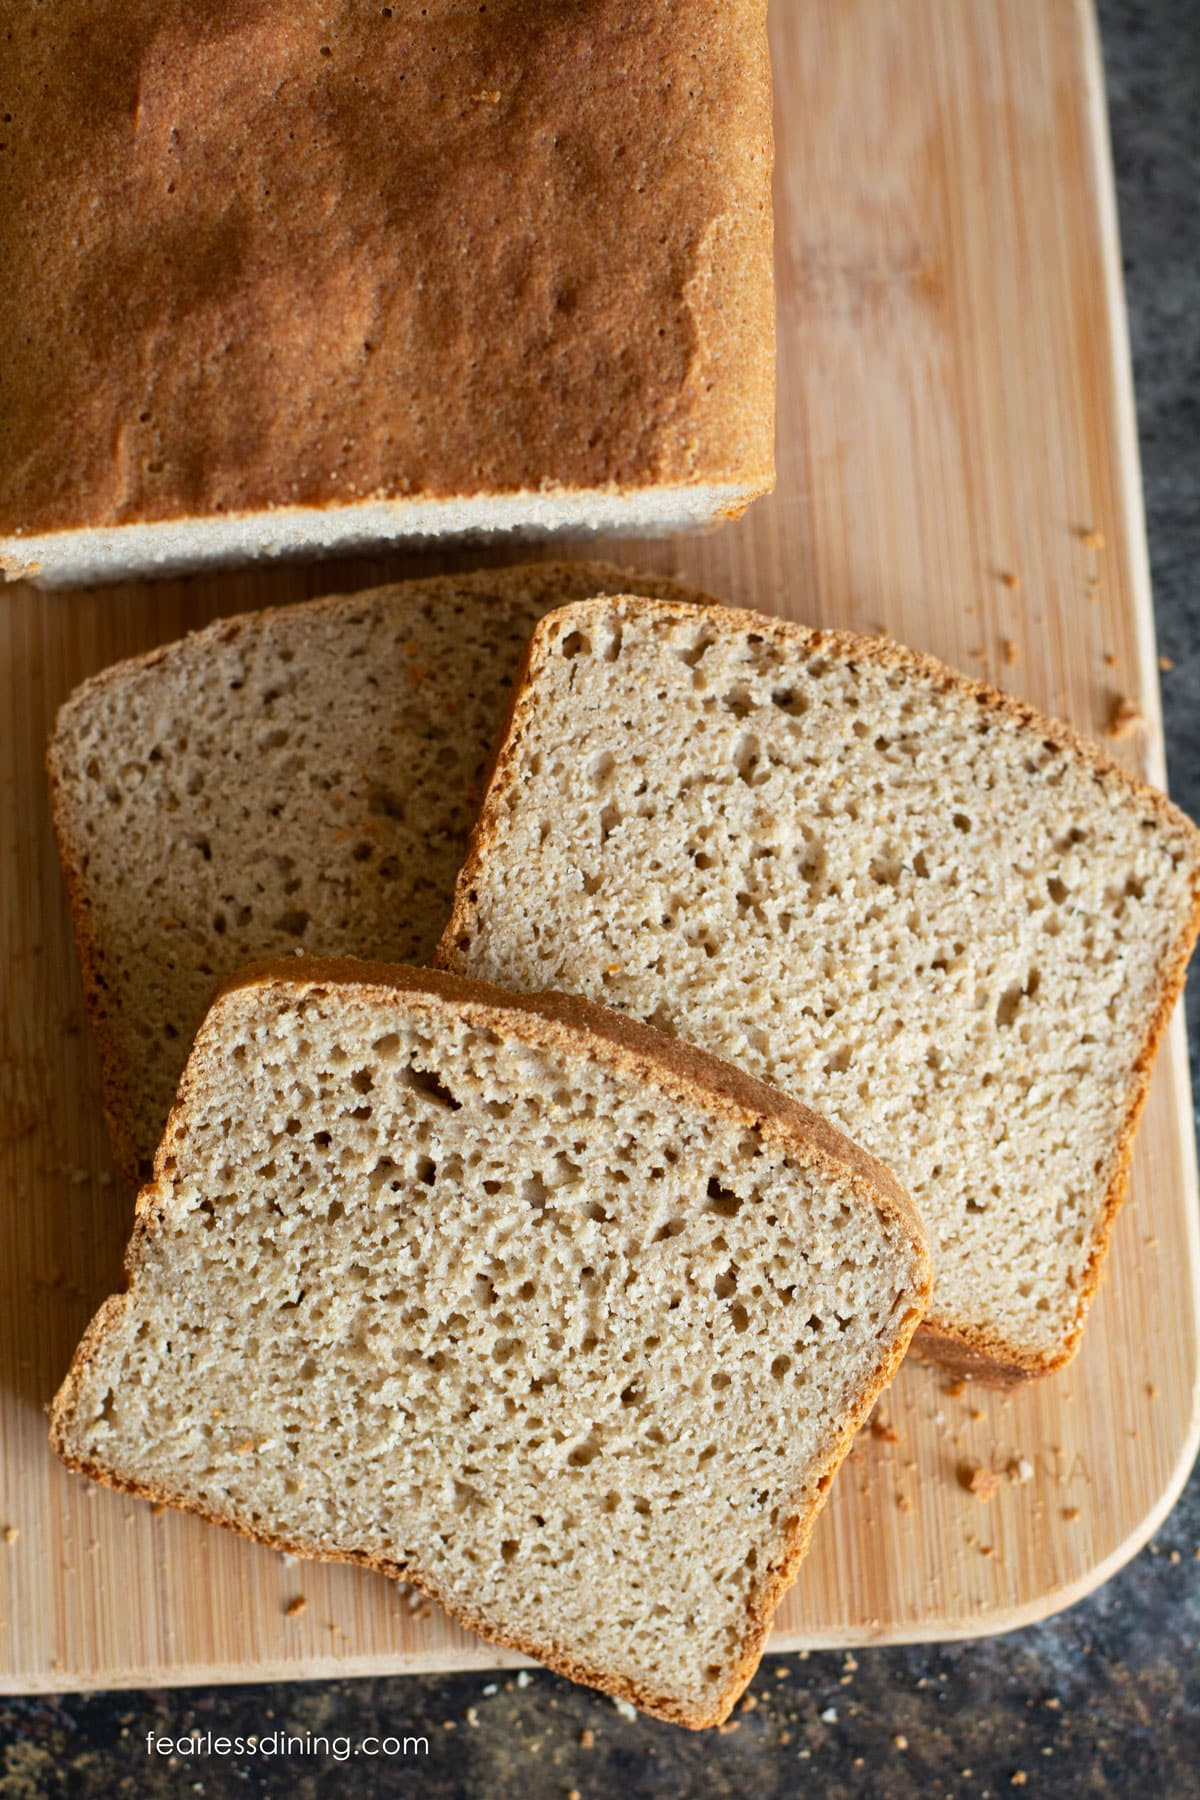 The top view of the sliced loaf of whole grain bread.